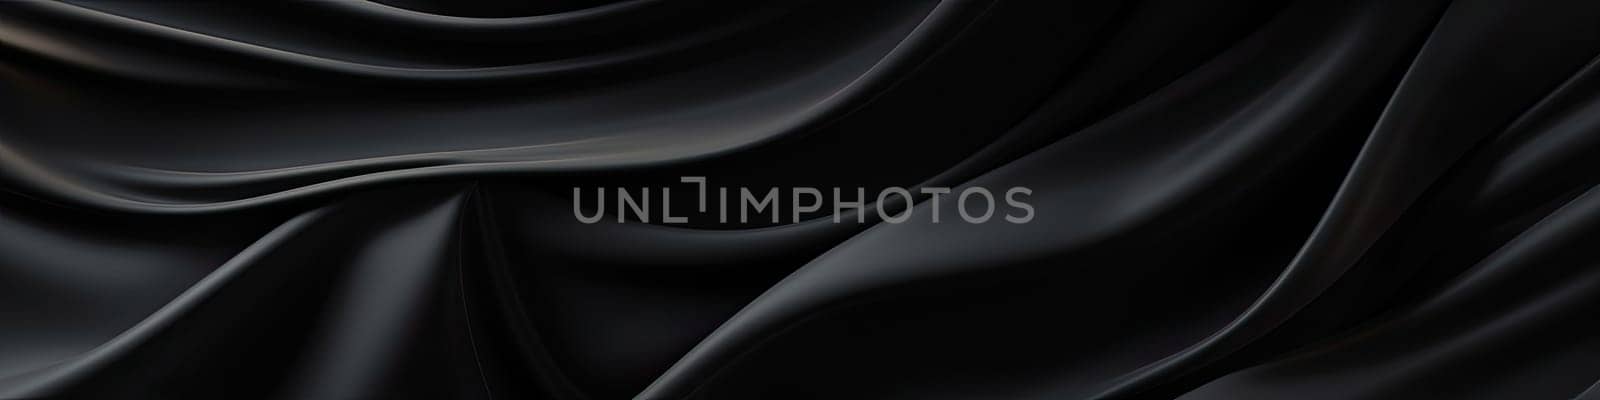 Abstract background luxury black cloth or liquid wave or wavy fold of grunge silk texture satin velvet as banner by Kadula